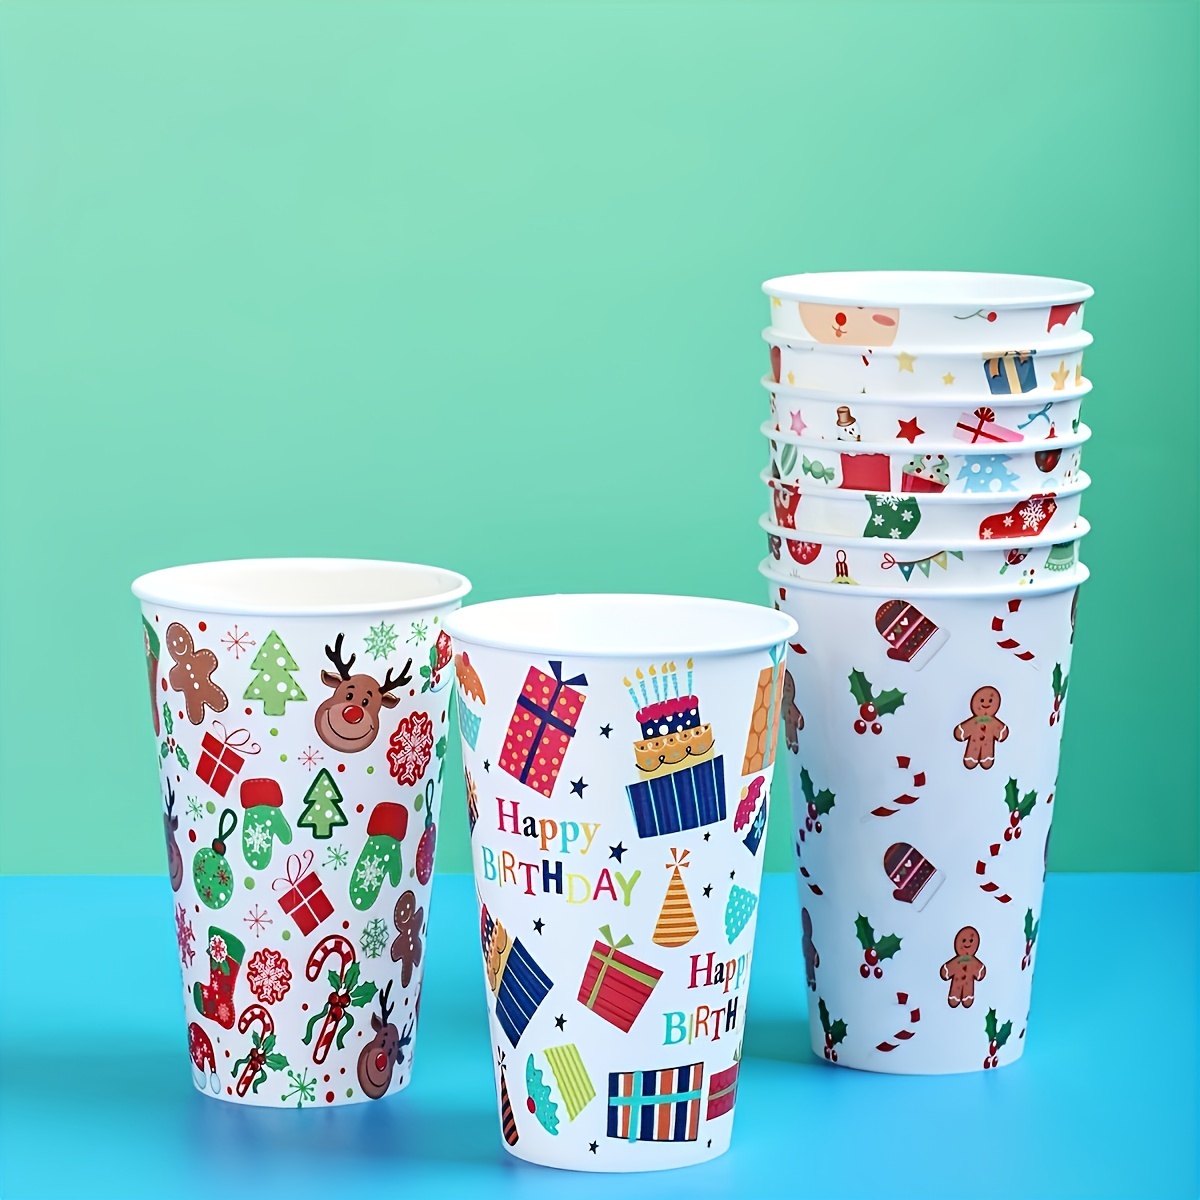 60 Pcs Reusable Holiday Plastic Cups, Festive 16 oz Christmas Party Cups  in Red